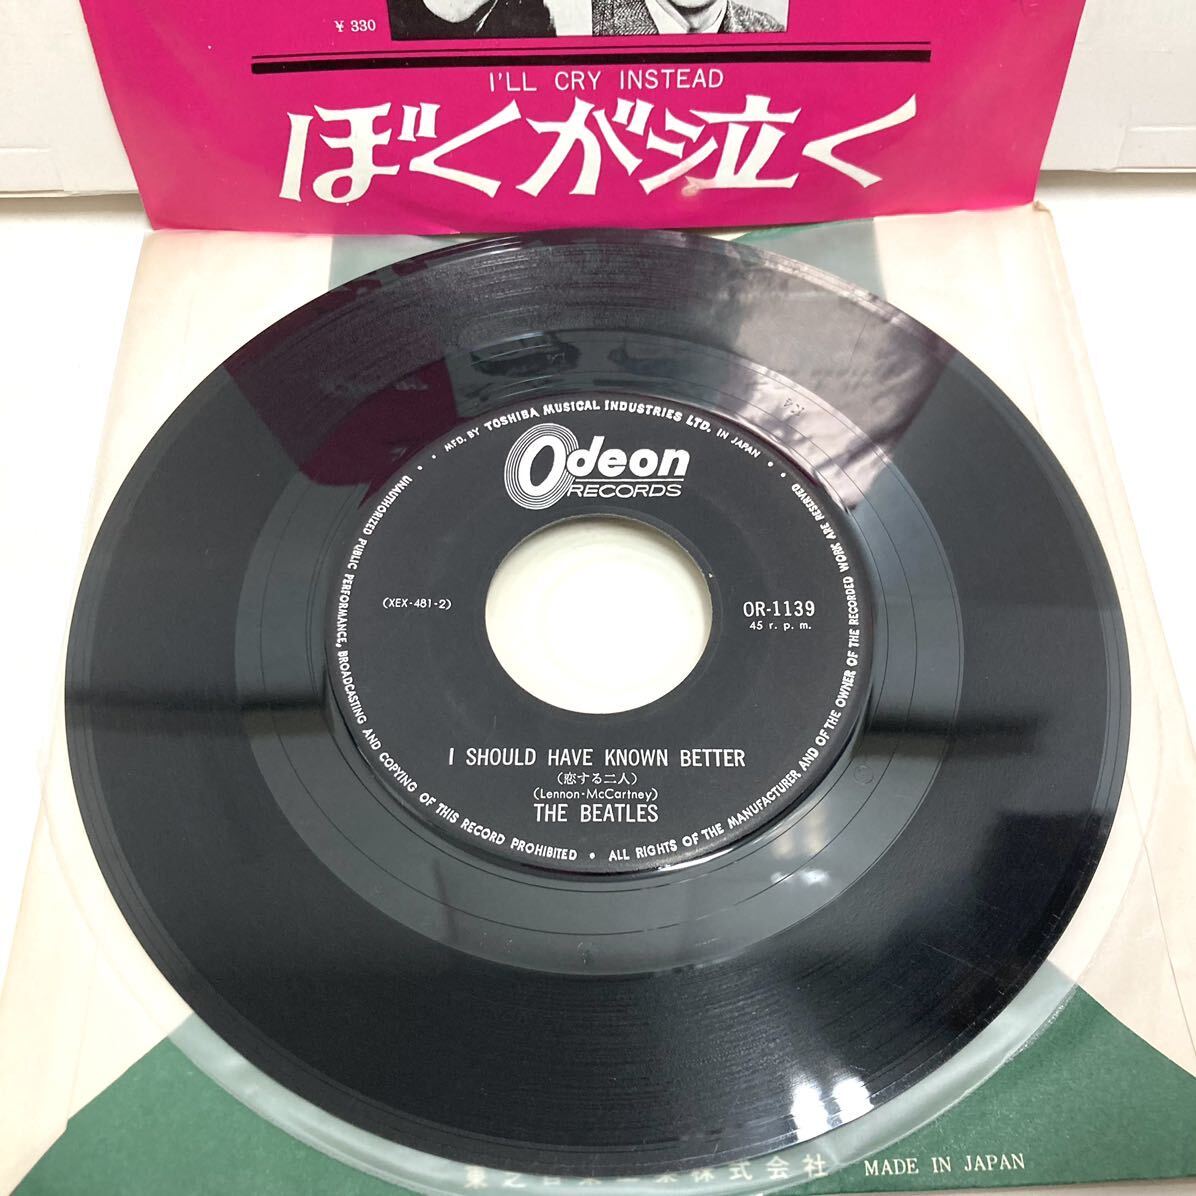 I Should Have Known Better 恋する二人 , I'll Cry Instead / The Beatles ビートルズ【EP アナログ レコード 】サウンドトラック盤 _画像2